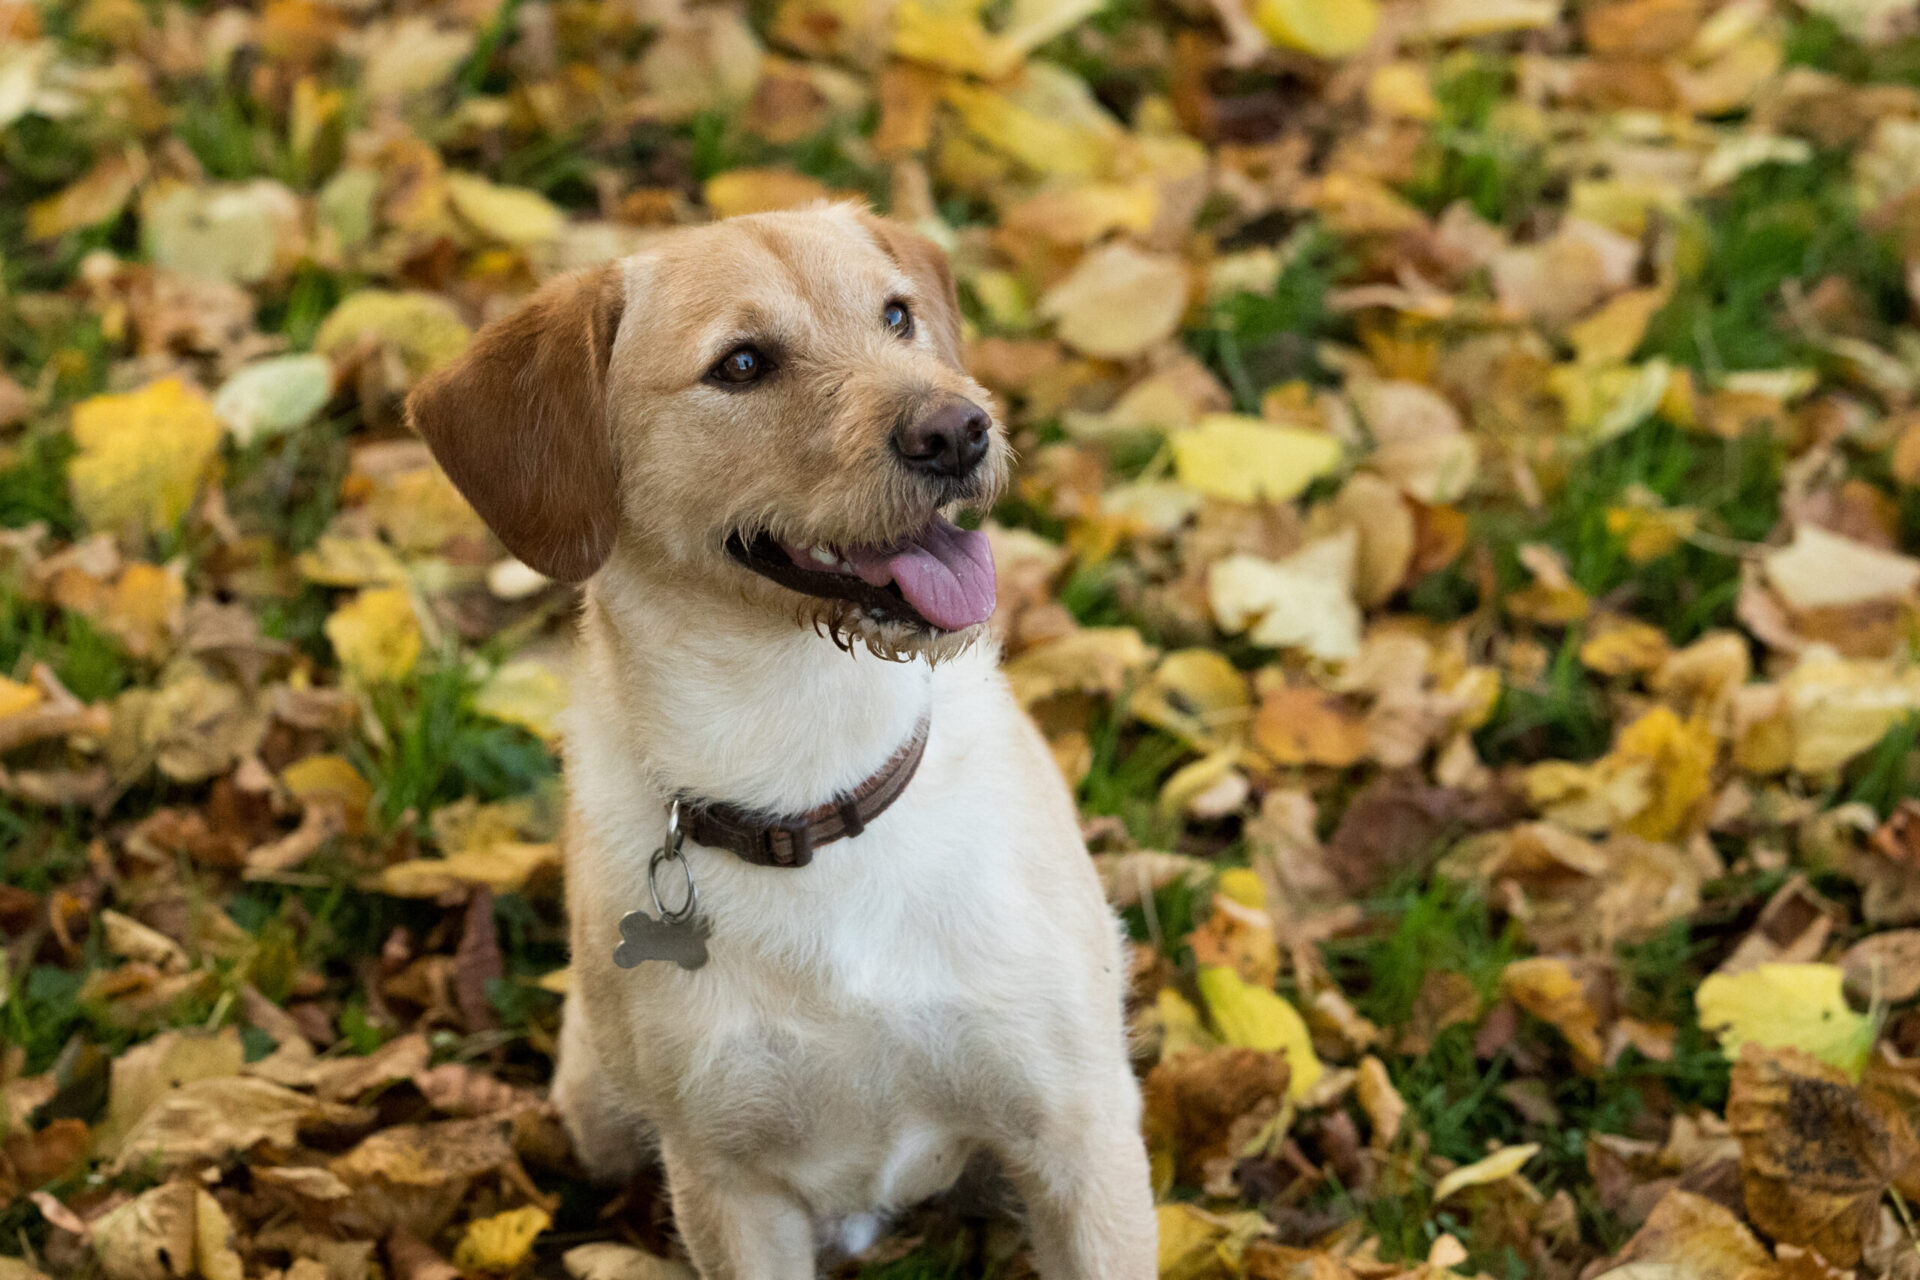 Autumn walks – stay safe with these top tips